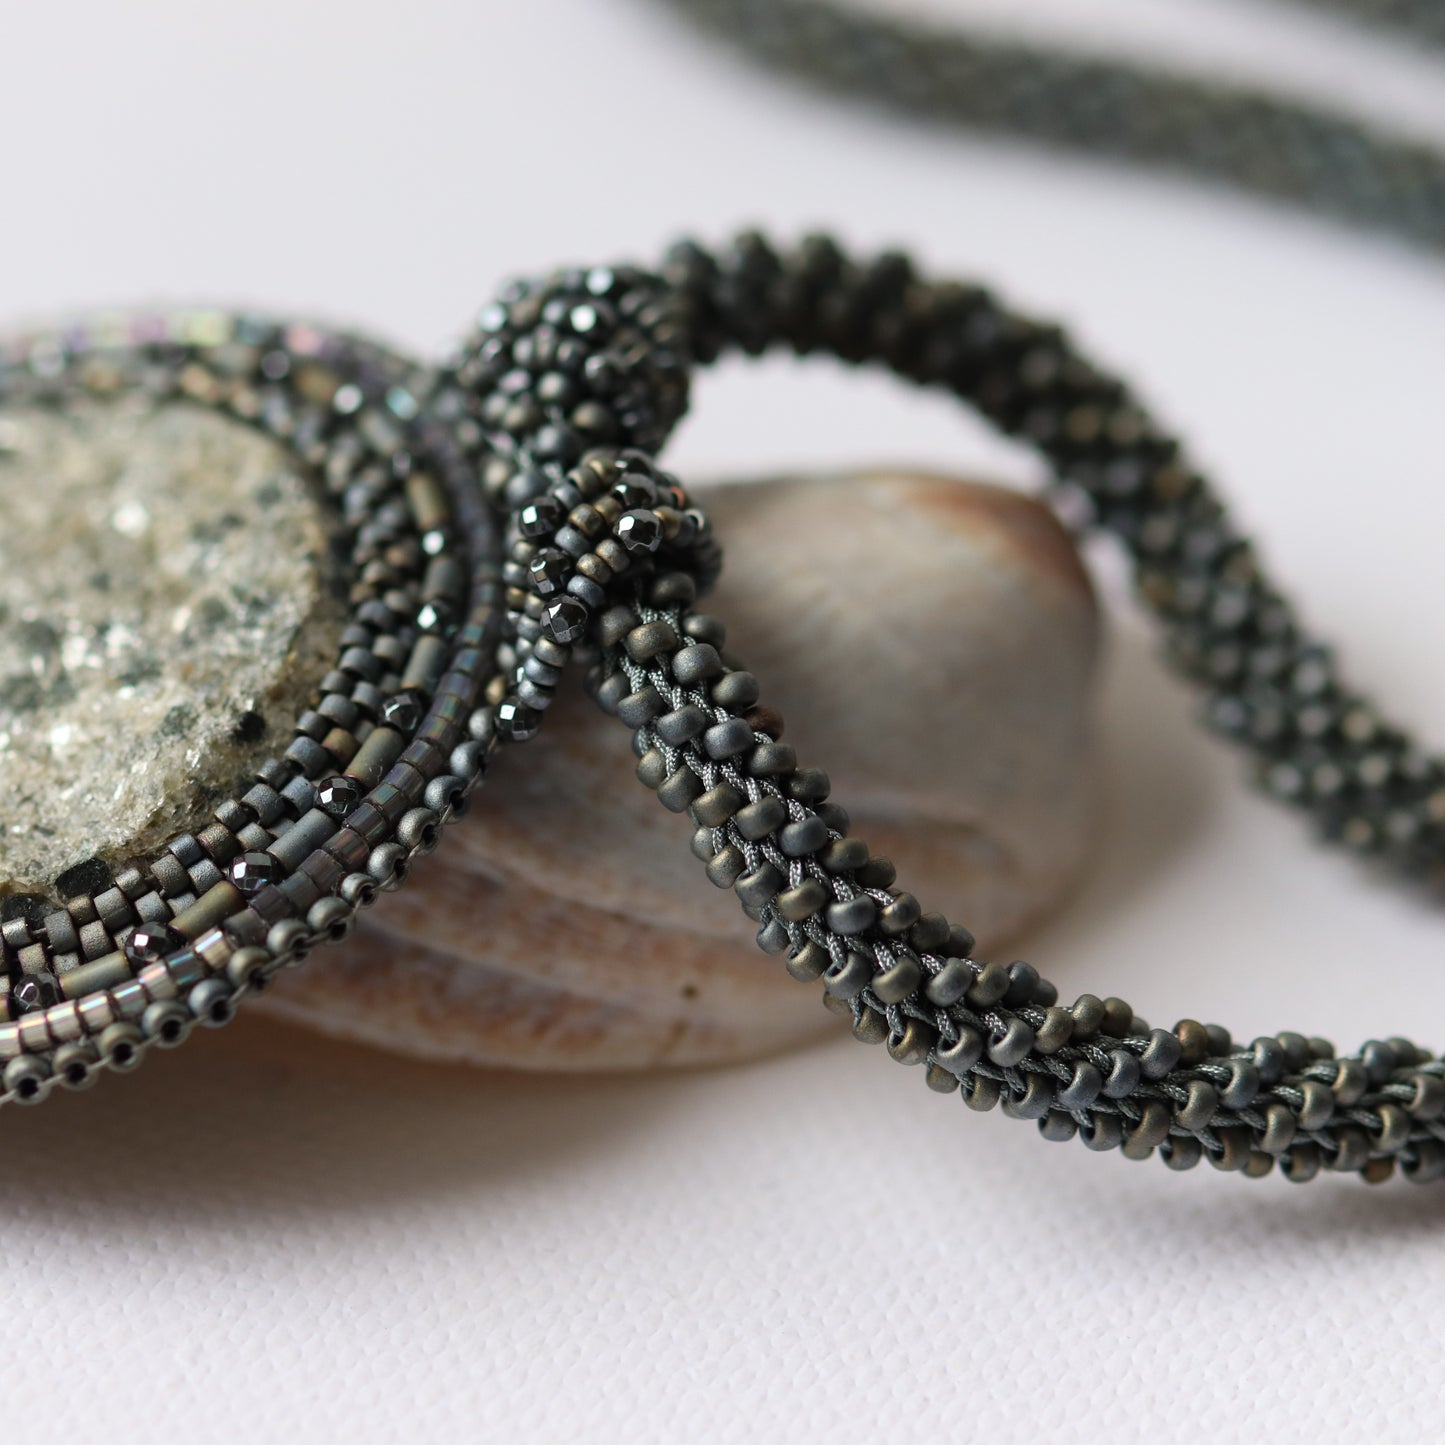 Embroidered necklace with mica schist (contains mica and garnet)